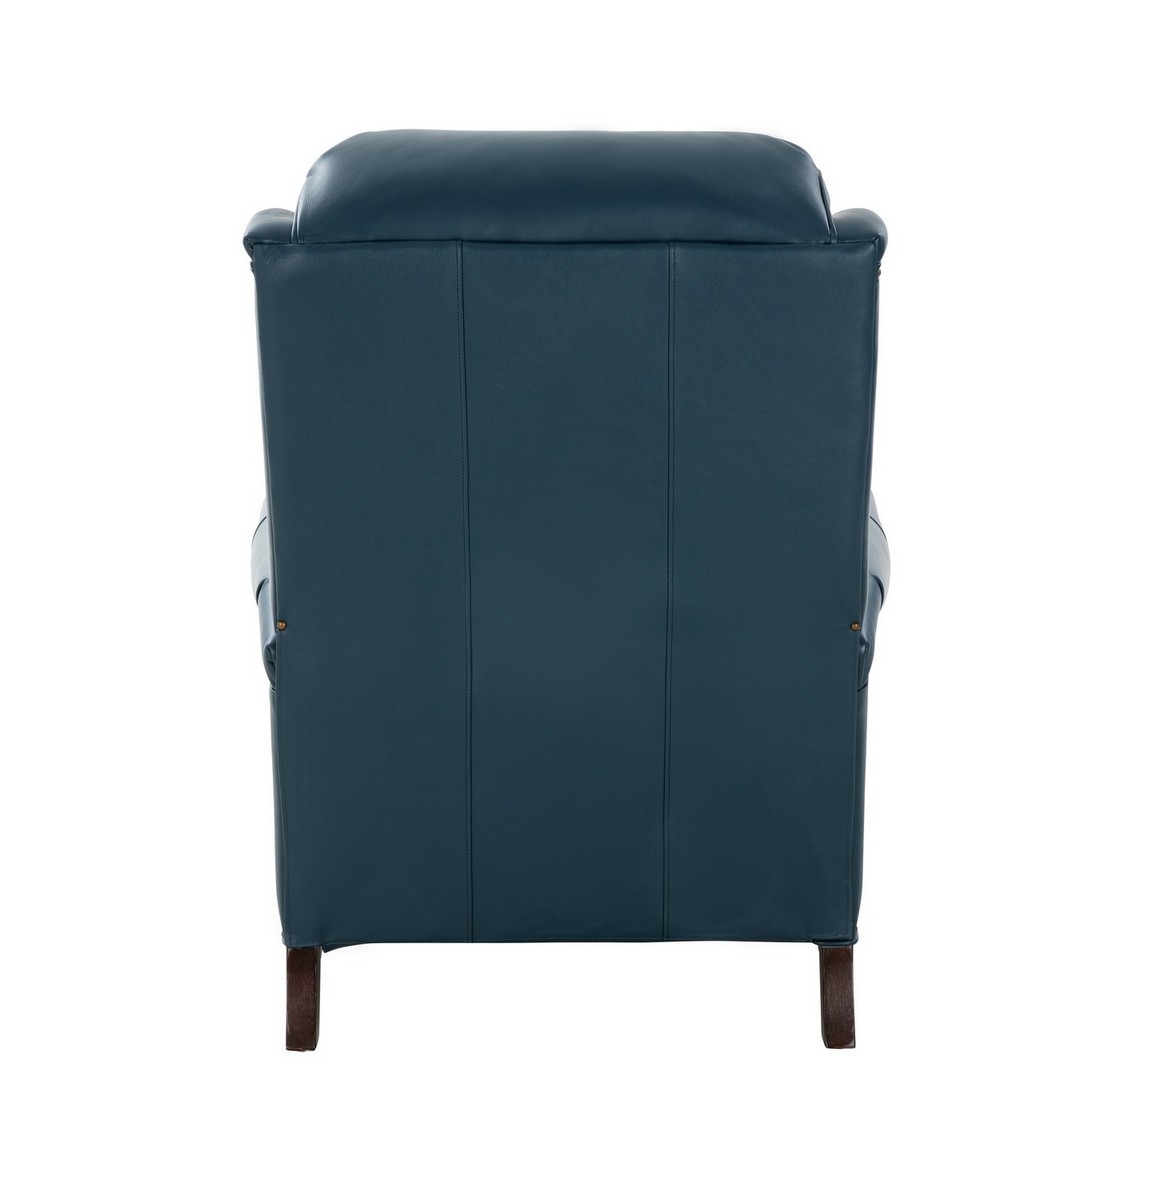 Barcalounger Thornfield Recliner Chair - Prestin Yale Blue/All Leather